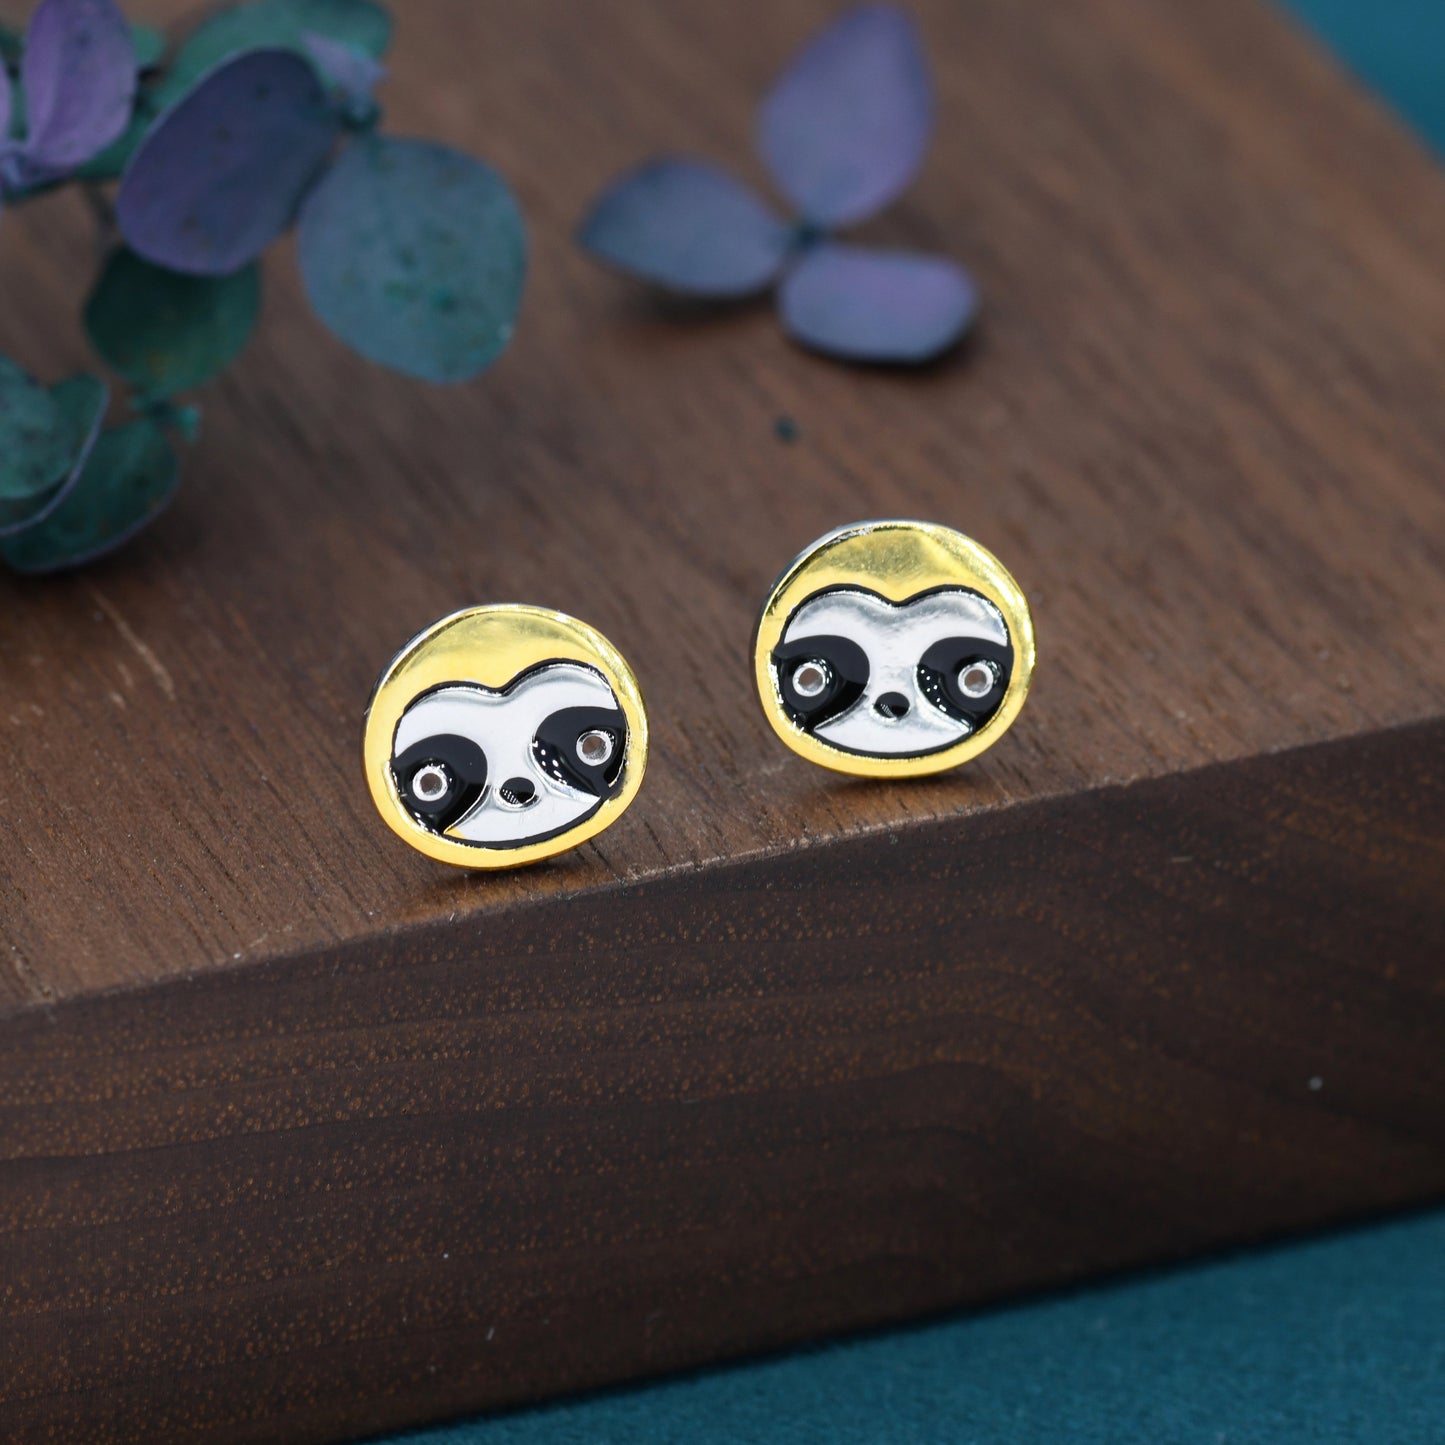 Sloth Stud Earrings in Sterling Silver,  Cute Fun Quirky Monkey Jewellery, Jewelry Gift for Her, Animal Lover, Nature Inspired L9